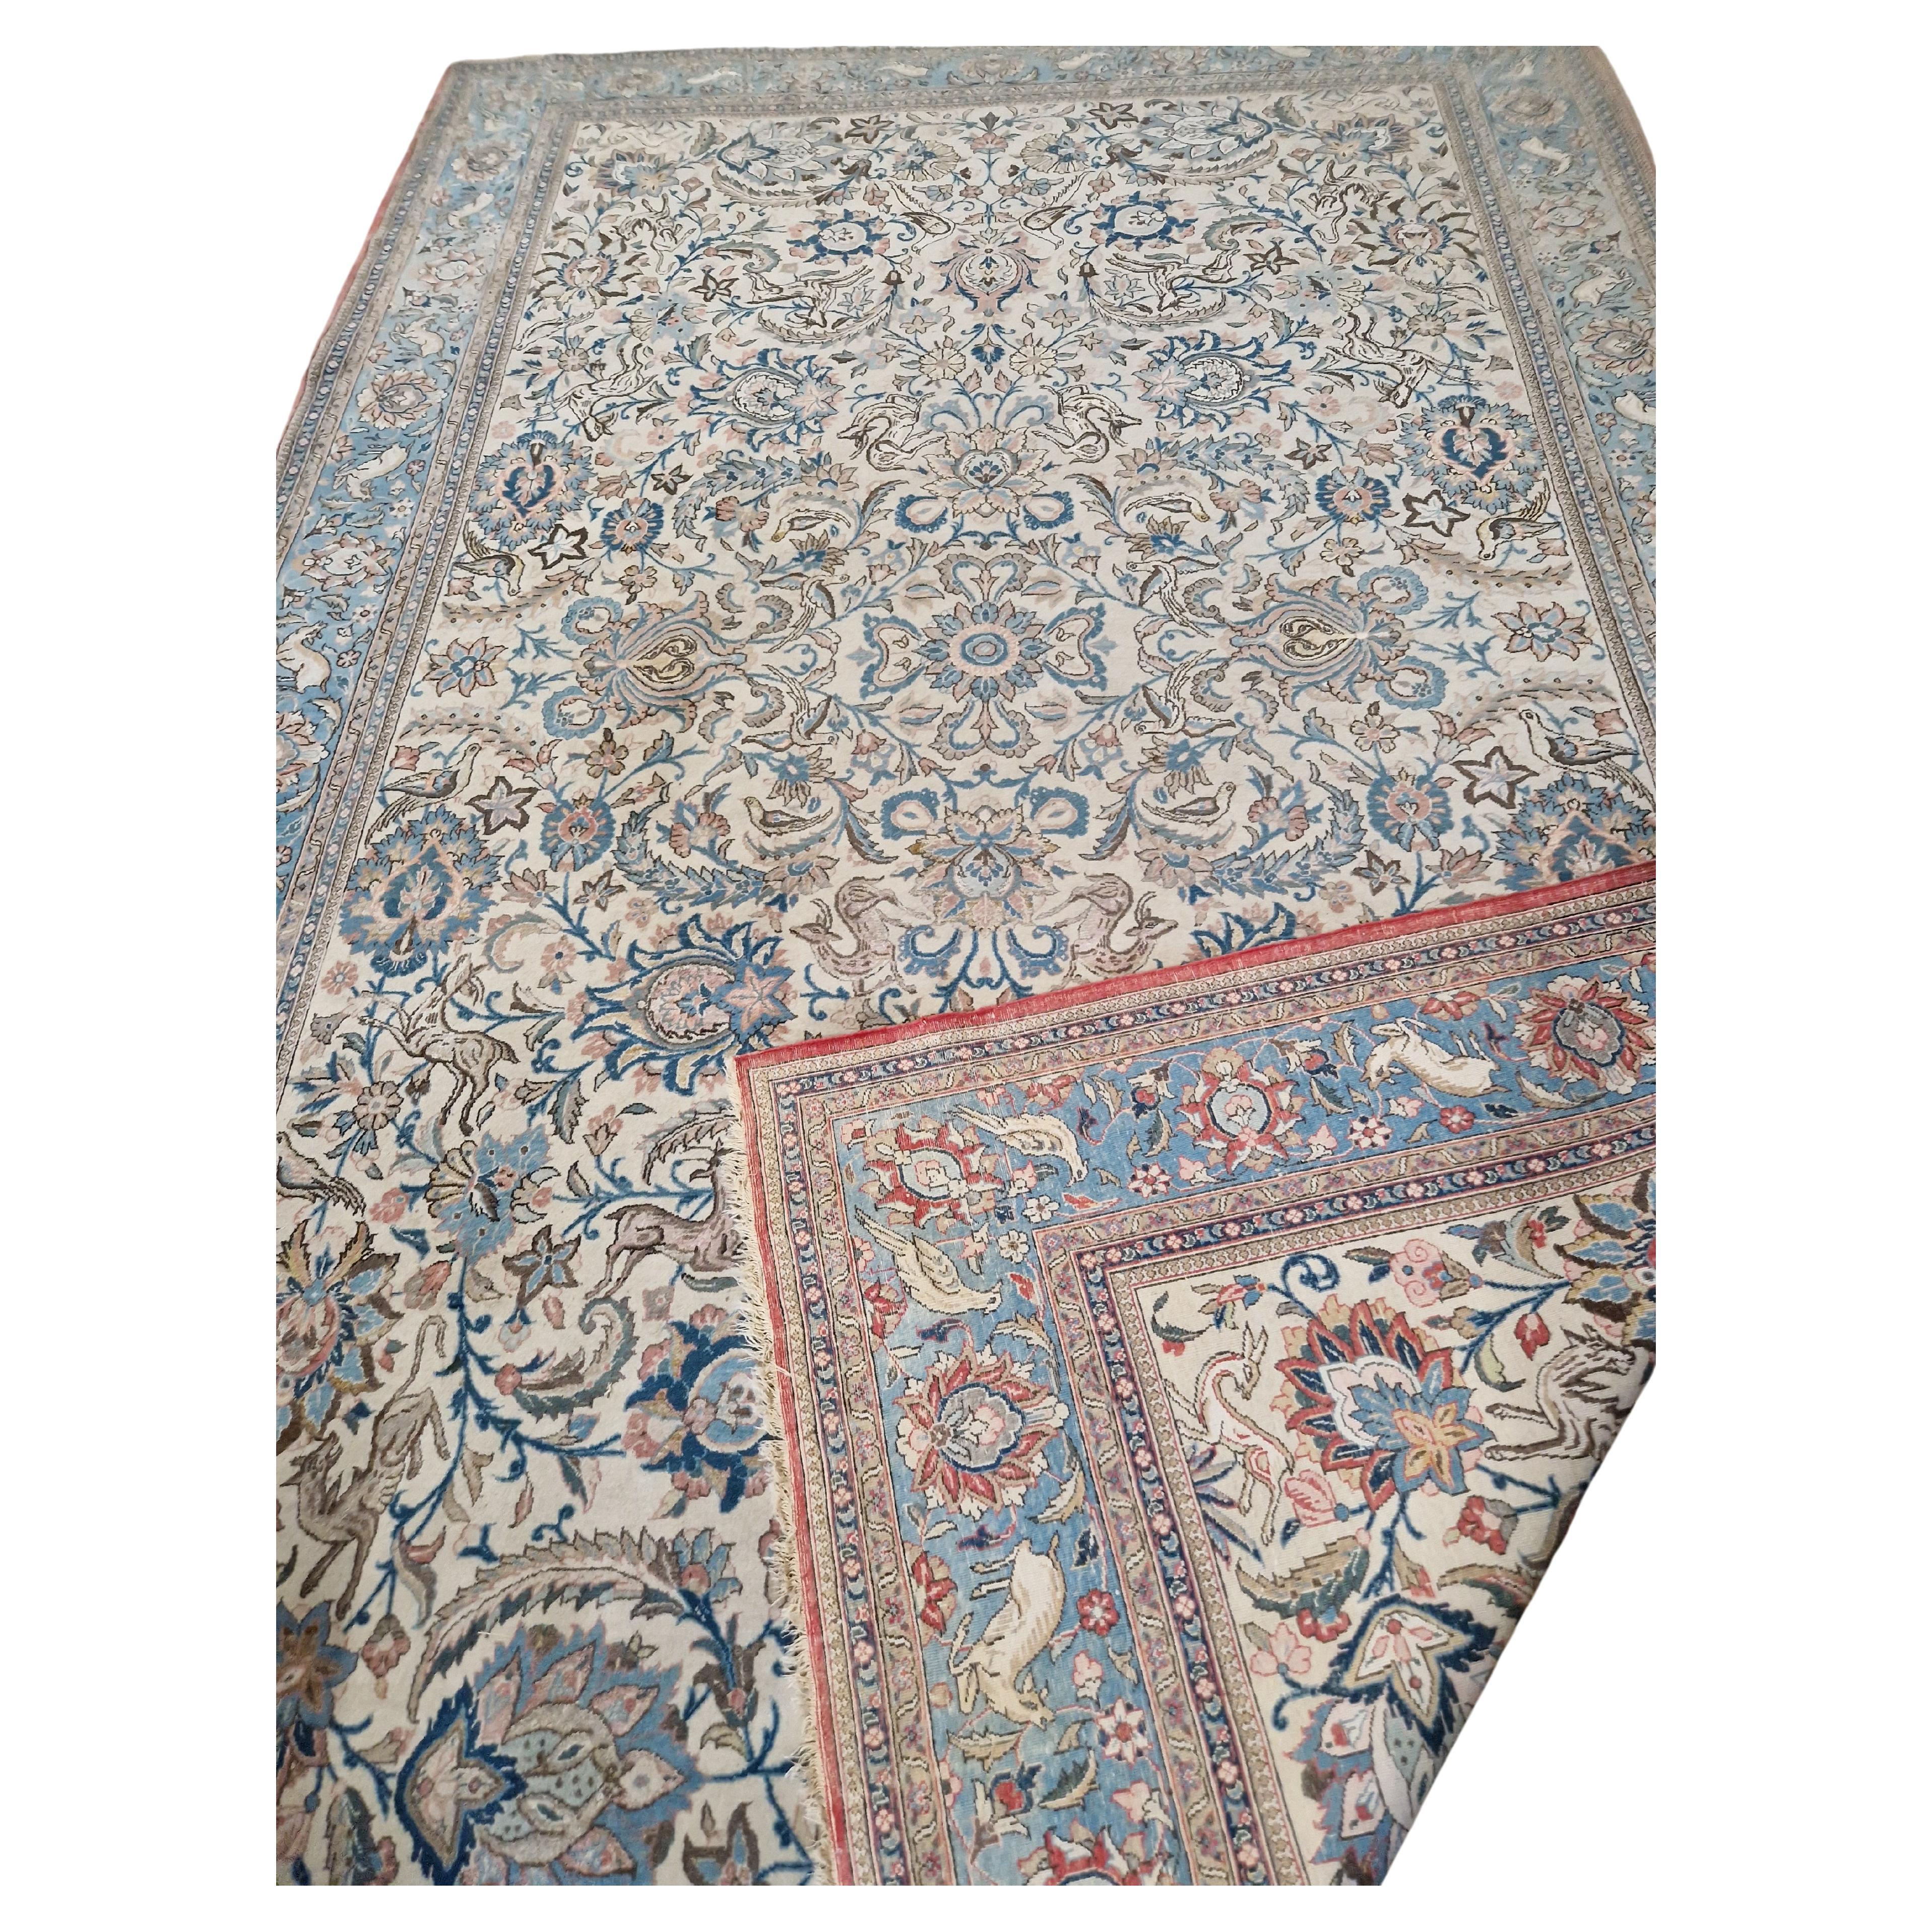 Add a touch of elegance to any room with this unique antique Persian rug from the city of GHOM Measuring 355 x 232 cm, this hand-hooked rug features a rectangular shape and a stunning multicoloured design that is sure to impress. The rug is made